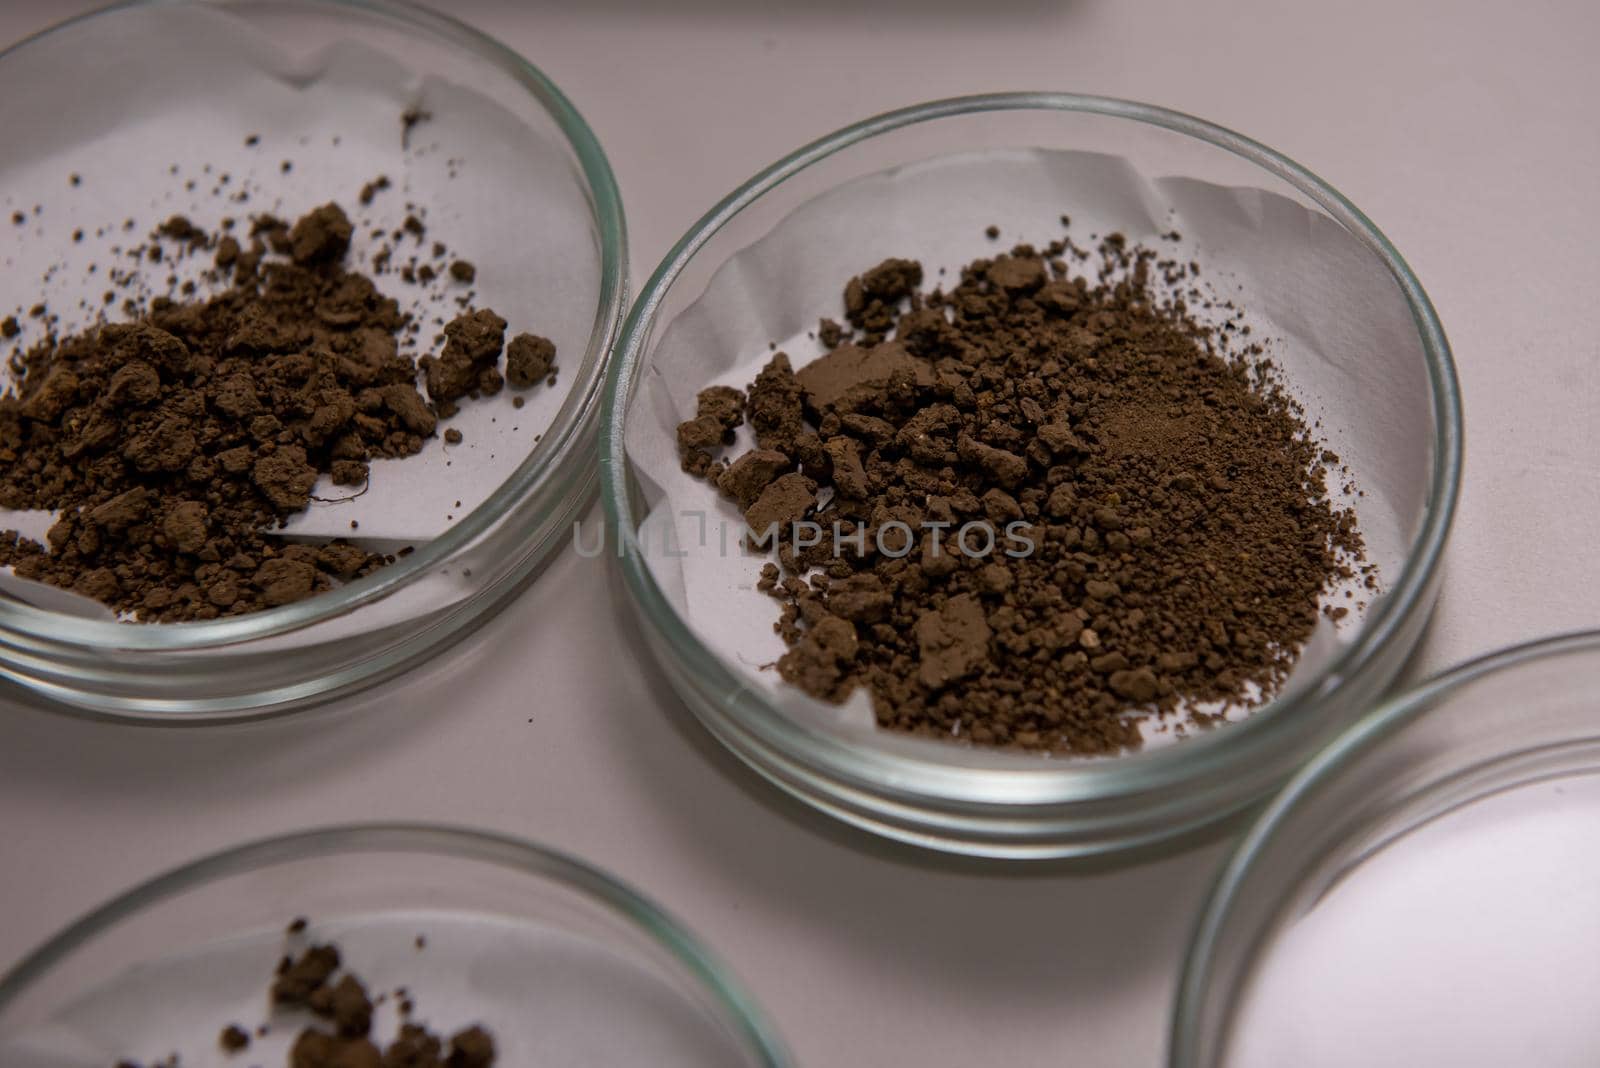 Glassware with soil samples. Laboratory research. Close-up. by leonik